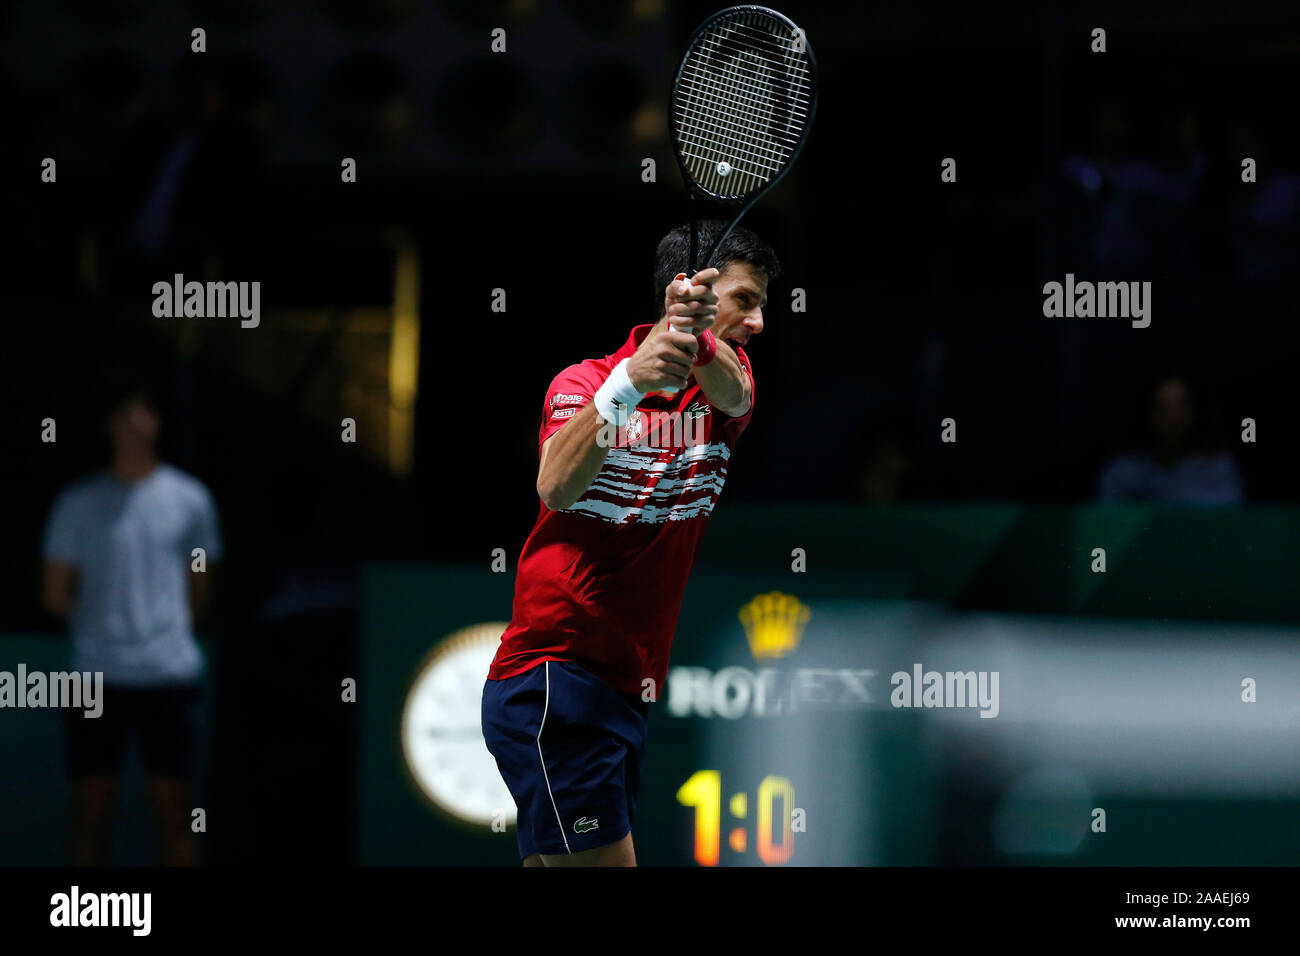 Novak Djokovic of Serbia in action against Benoit Paire of France during Day 4 of the 2019 Davis Cup at La Caja Magica. Stock Photo